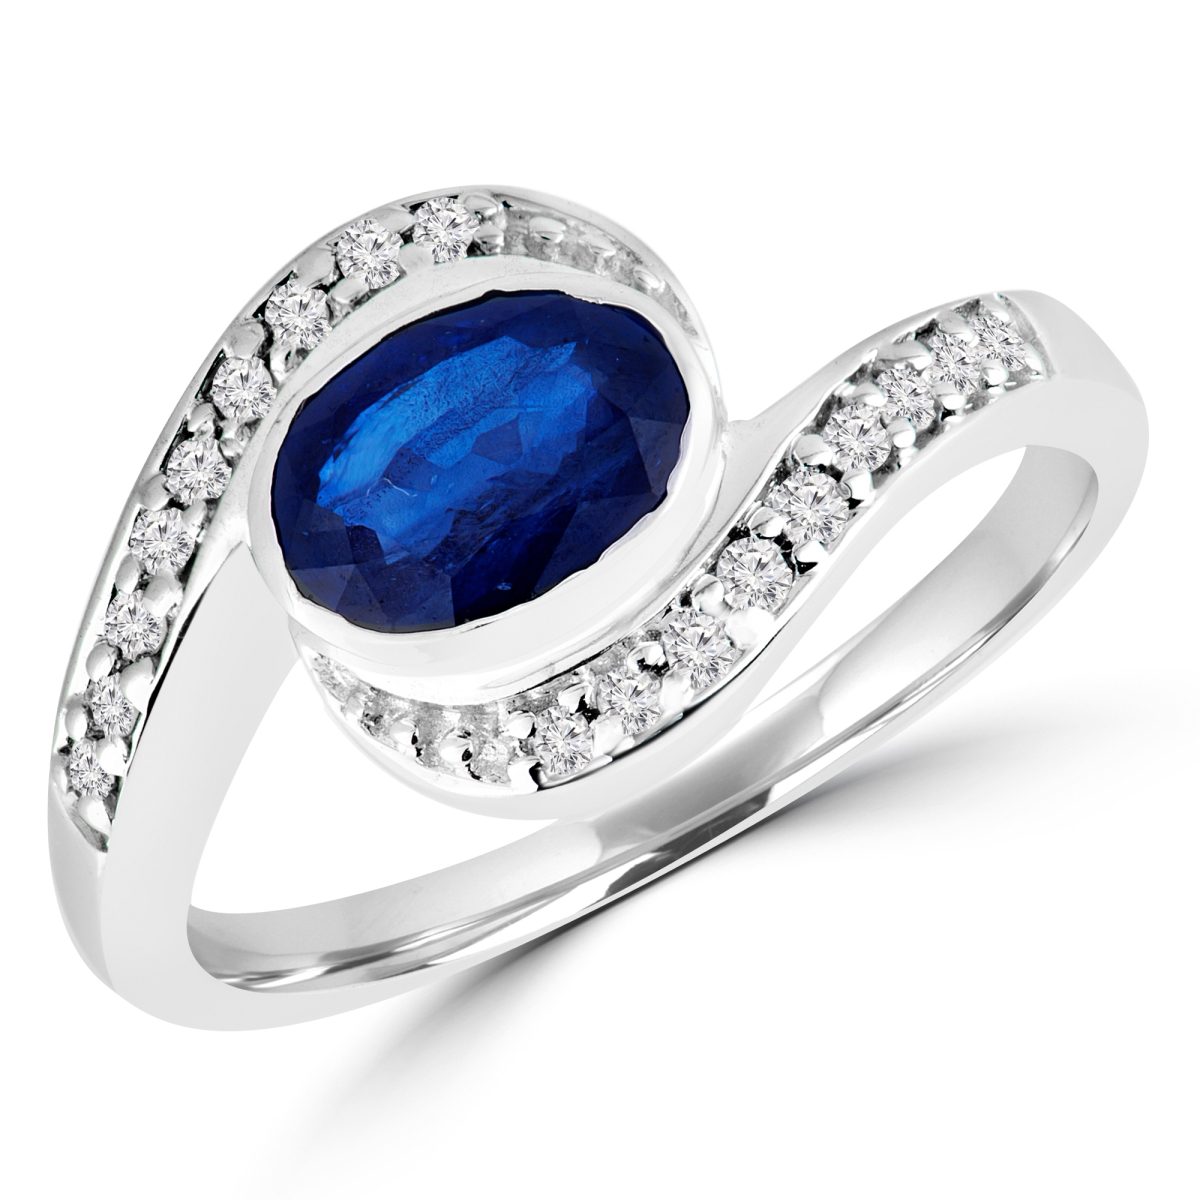 Picture of Majesty Diamonds MDR170020-3.25 1.1 CTW Oval Blue Sapphire Bypass Cocktail Ring in 14K White Gold - 3.25